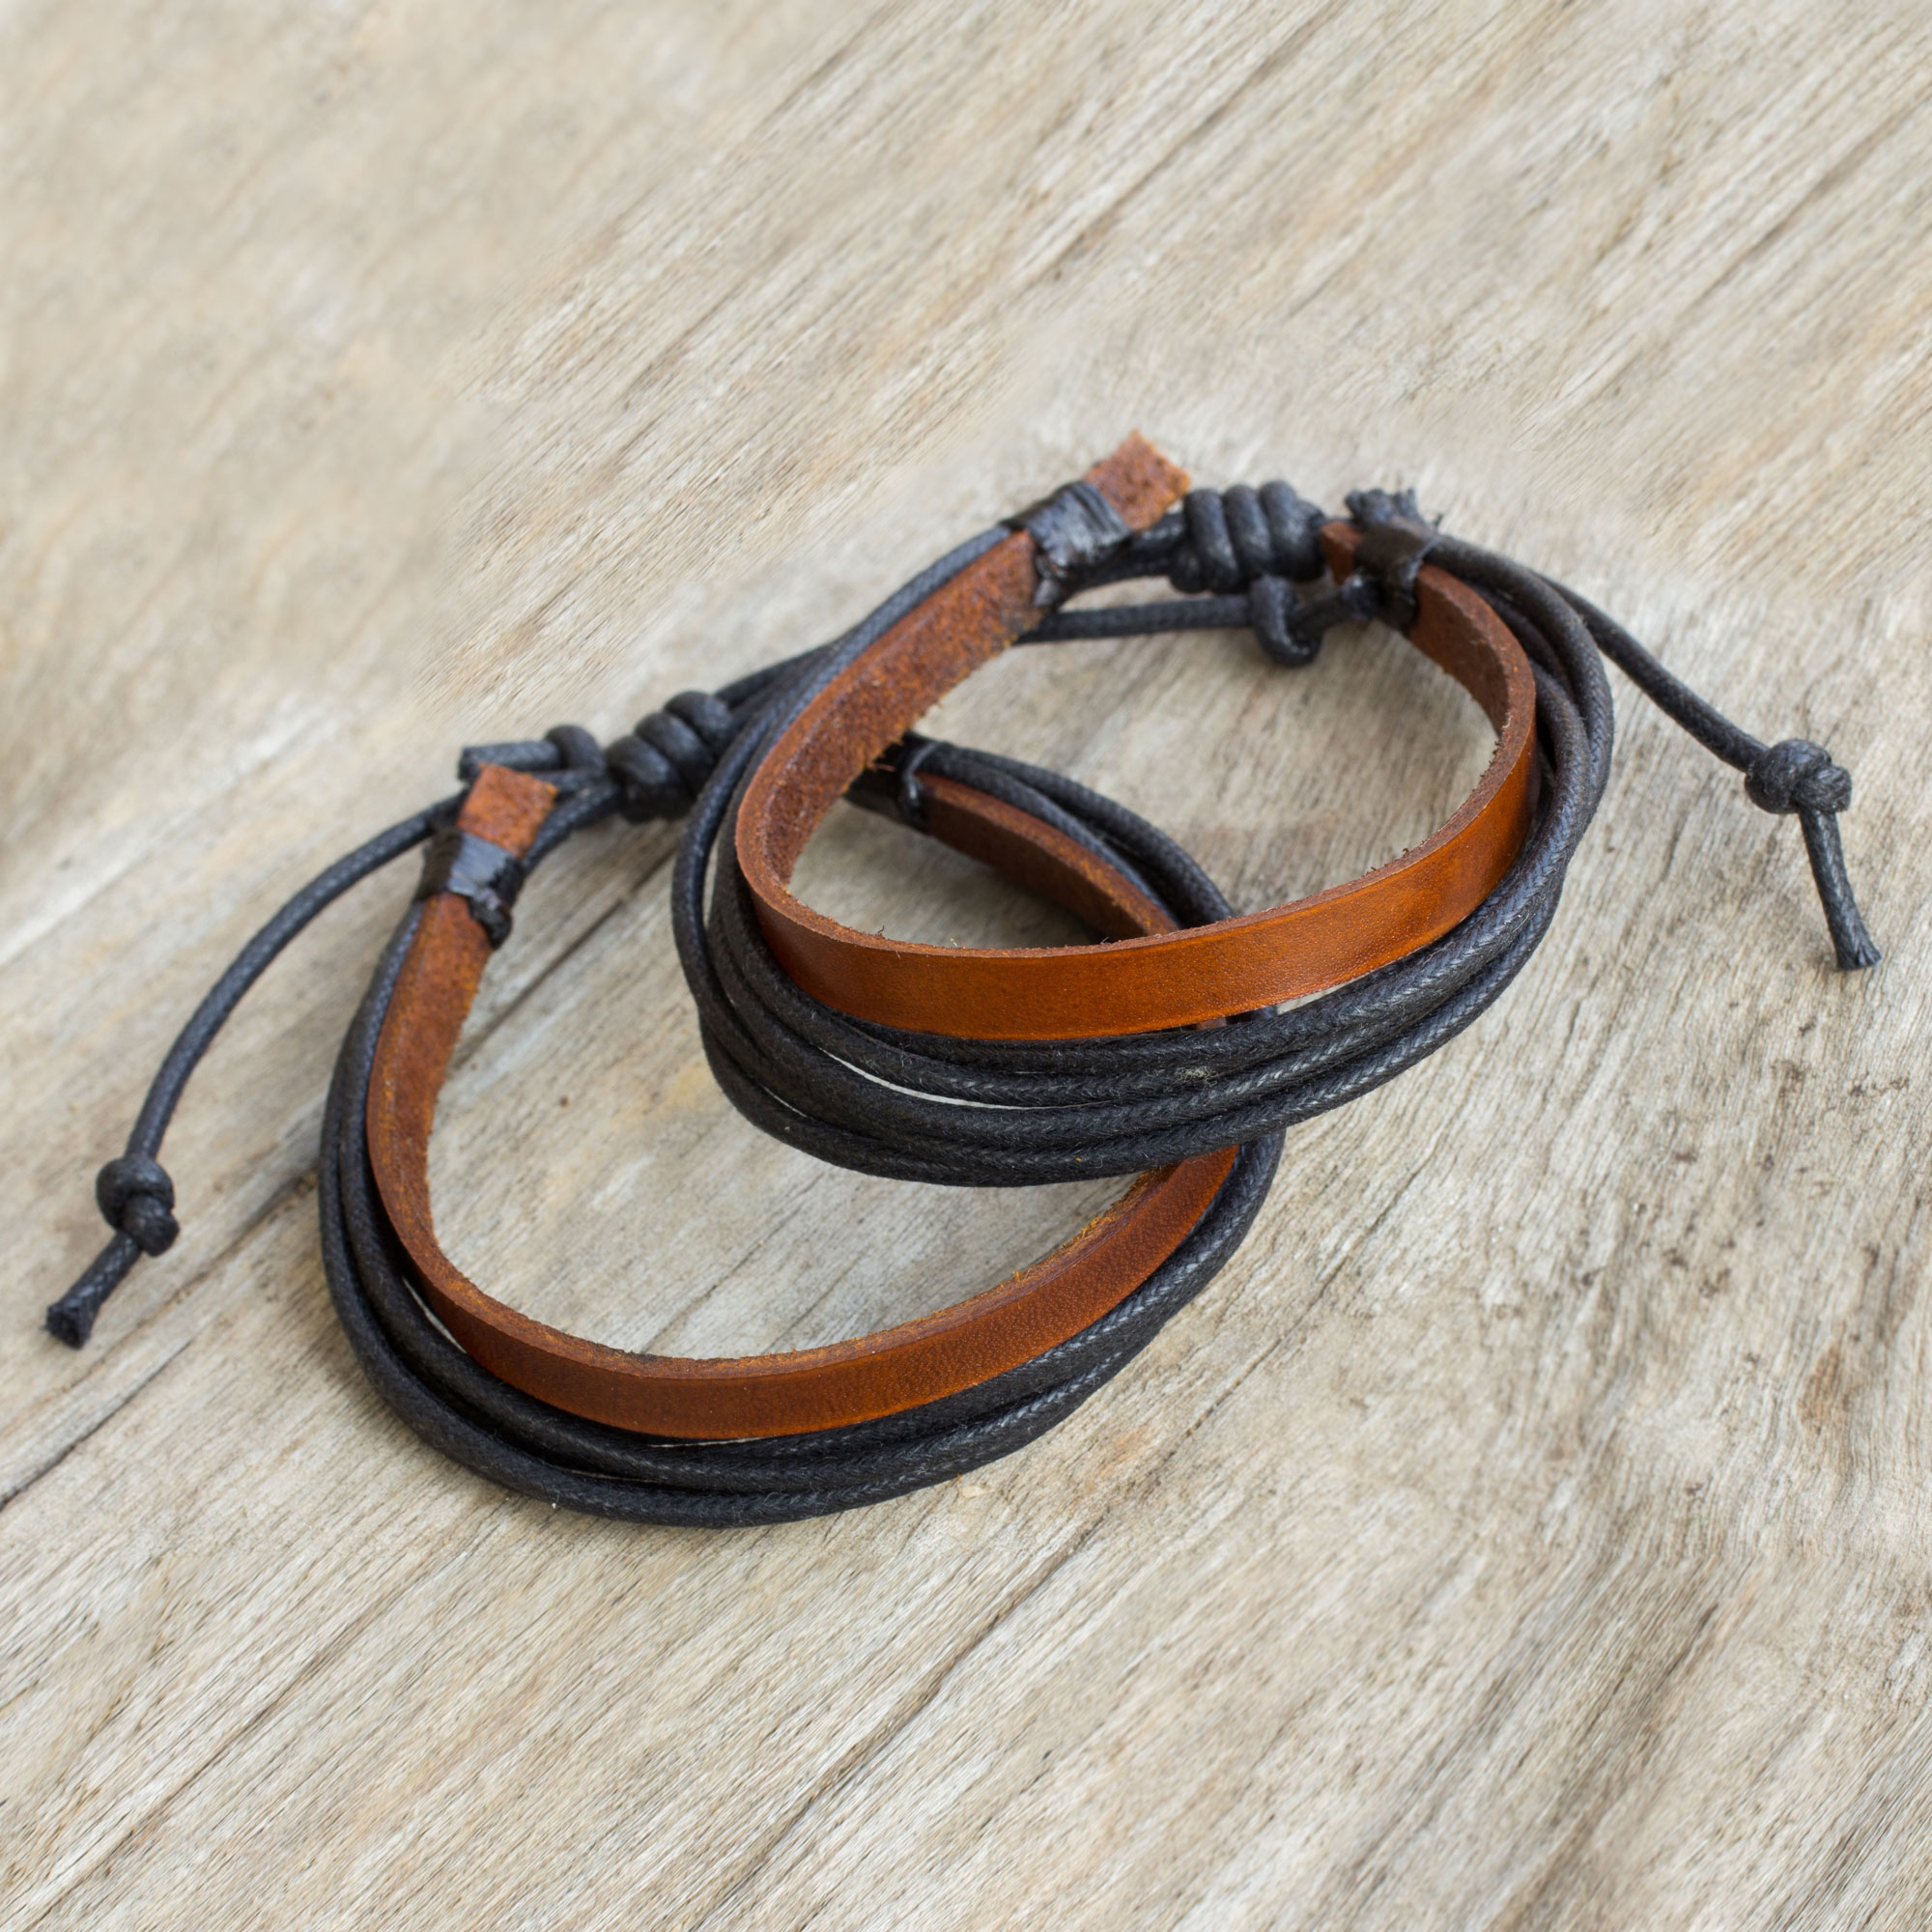 Brown Leather and Black Cotton Bracelets for Men (Pair) - Bold Contrast